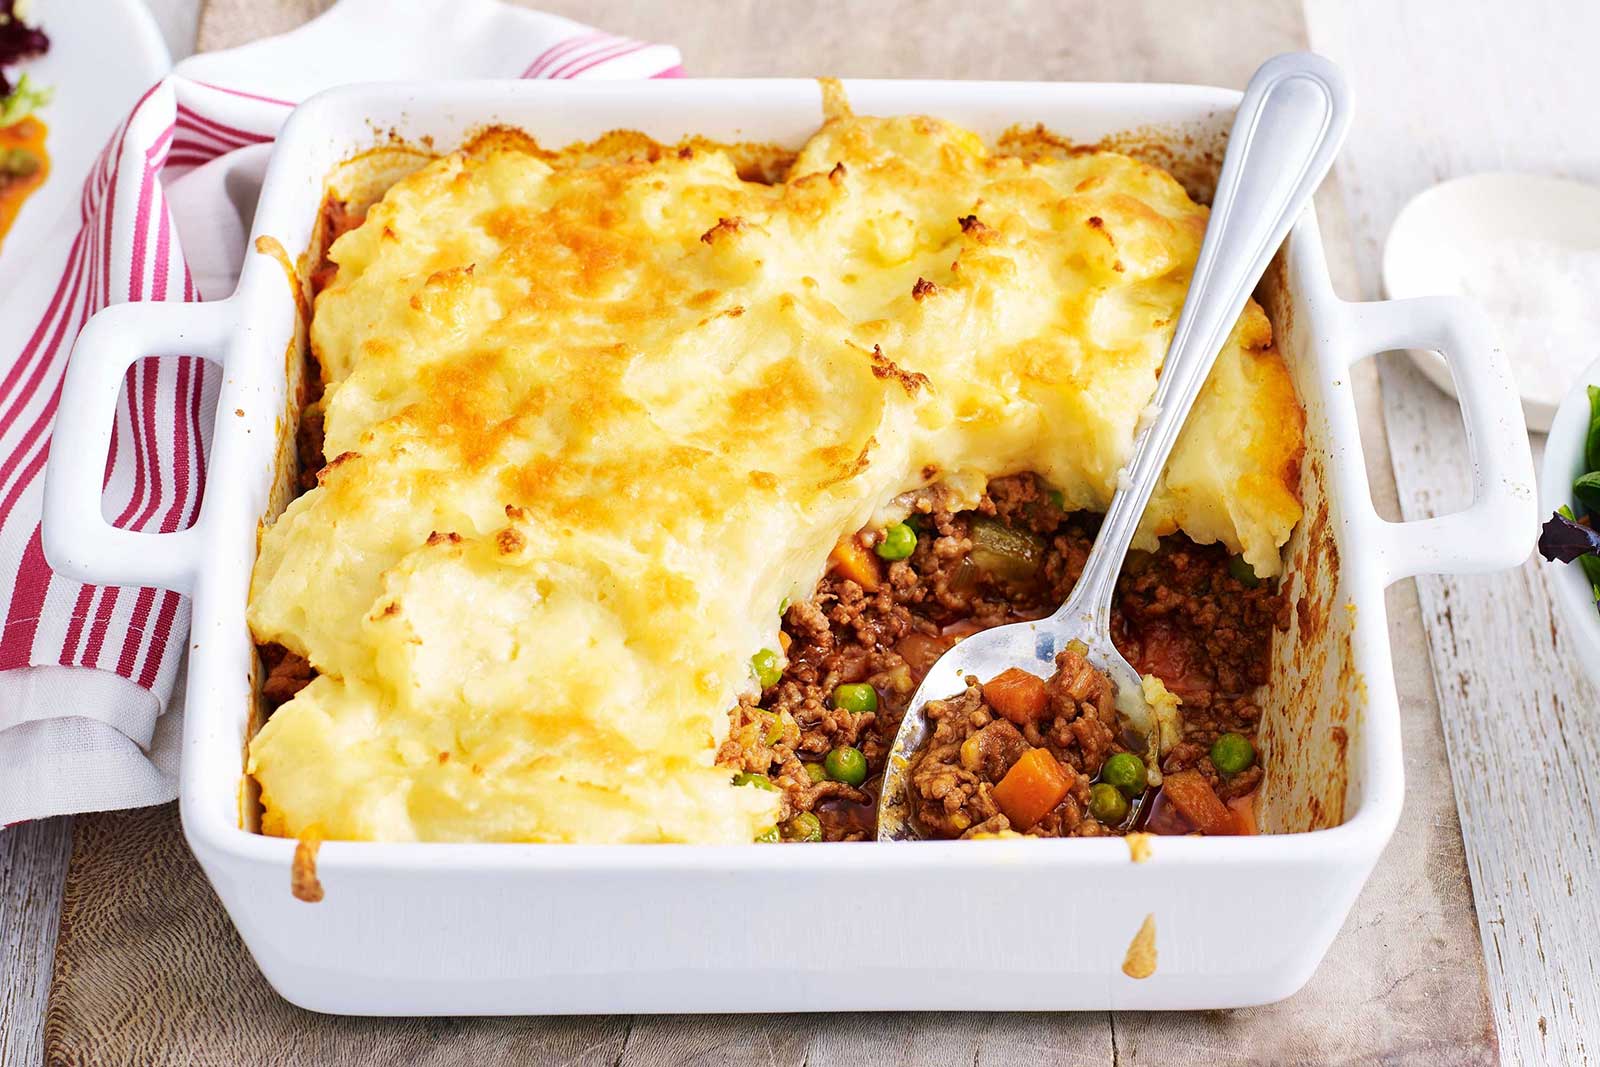 Only a Person Older Than 65 Will Like at Least 13/25 of These Foods Shepherds Pie